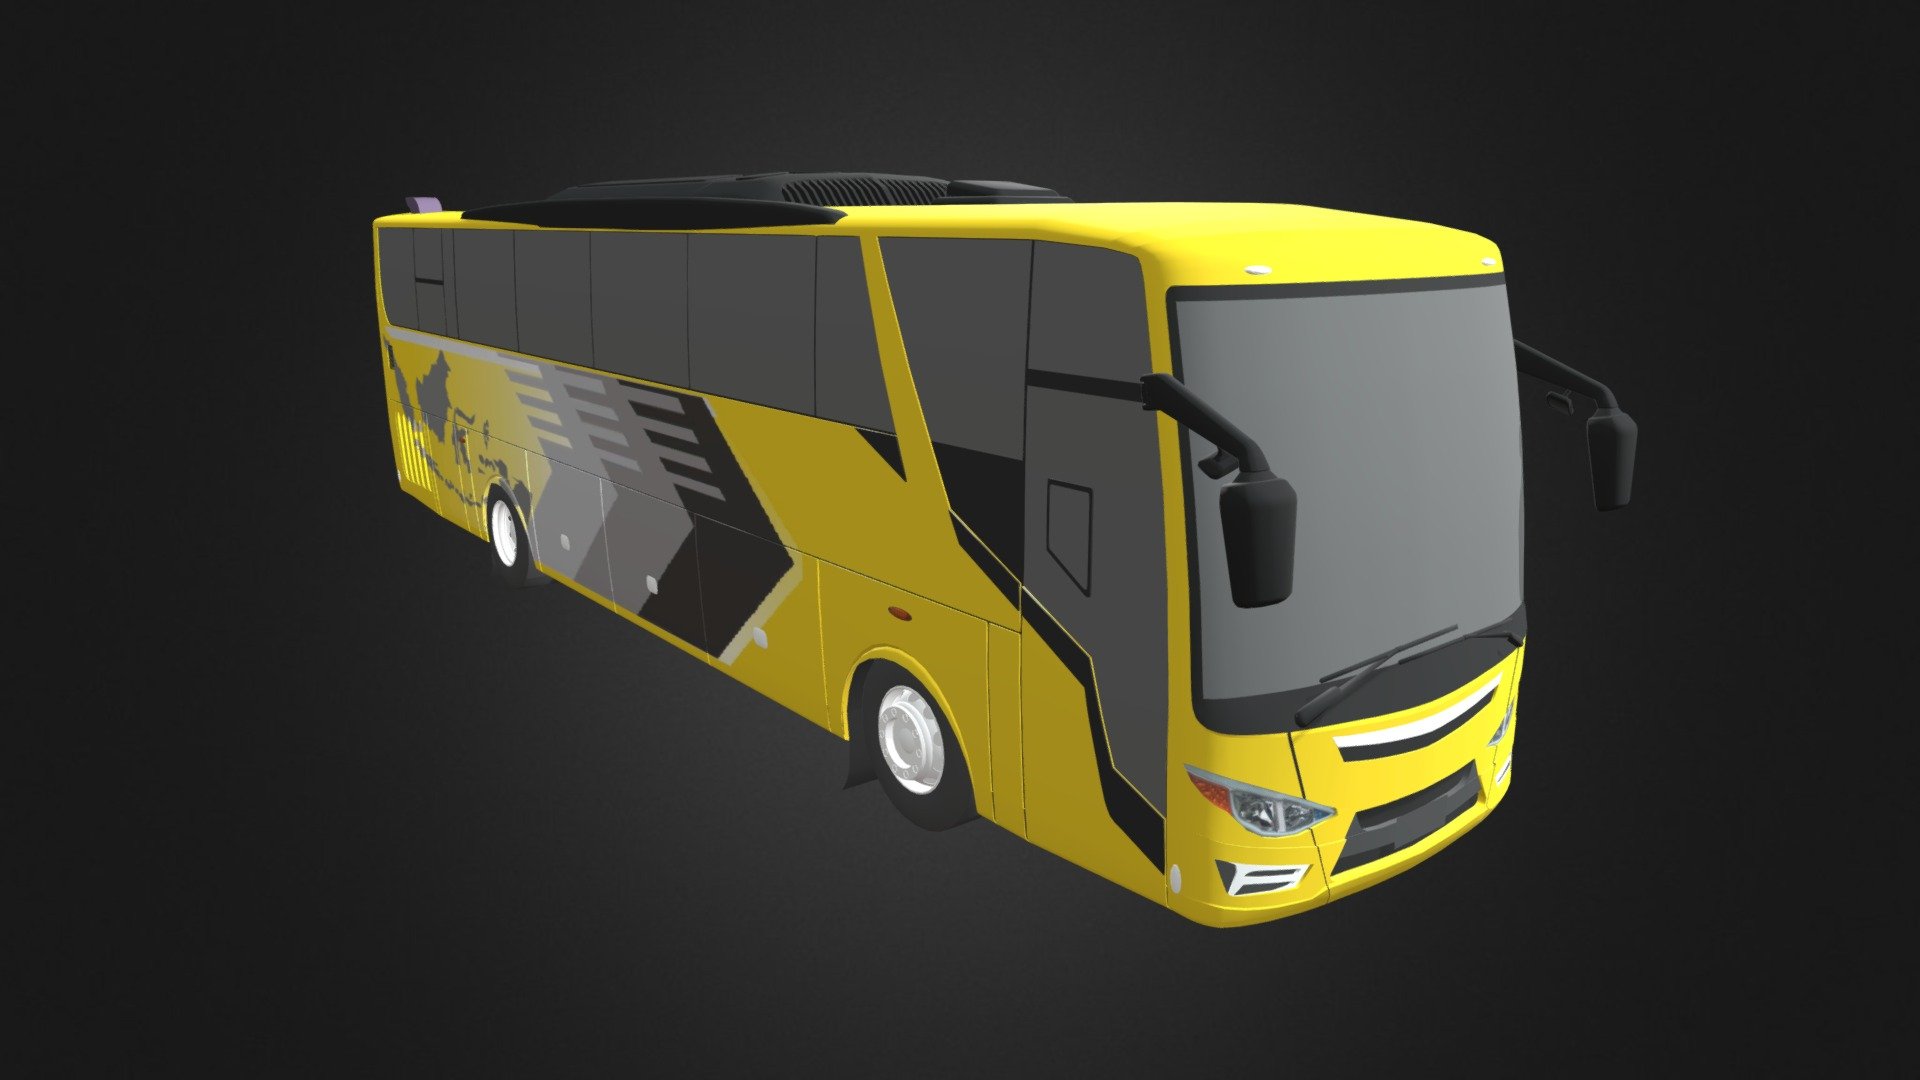 Indonesia Ecolin Bus 3d model made in blender it has FBX and OBJ file with textures
pls like and follow me - Indonesia Ecolin Bus - Download Free 3D model by Aditya Graphical (@Adityakm) 3d model